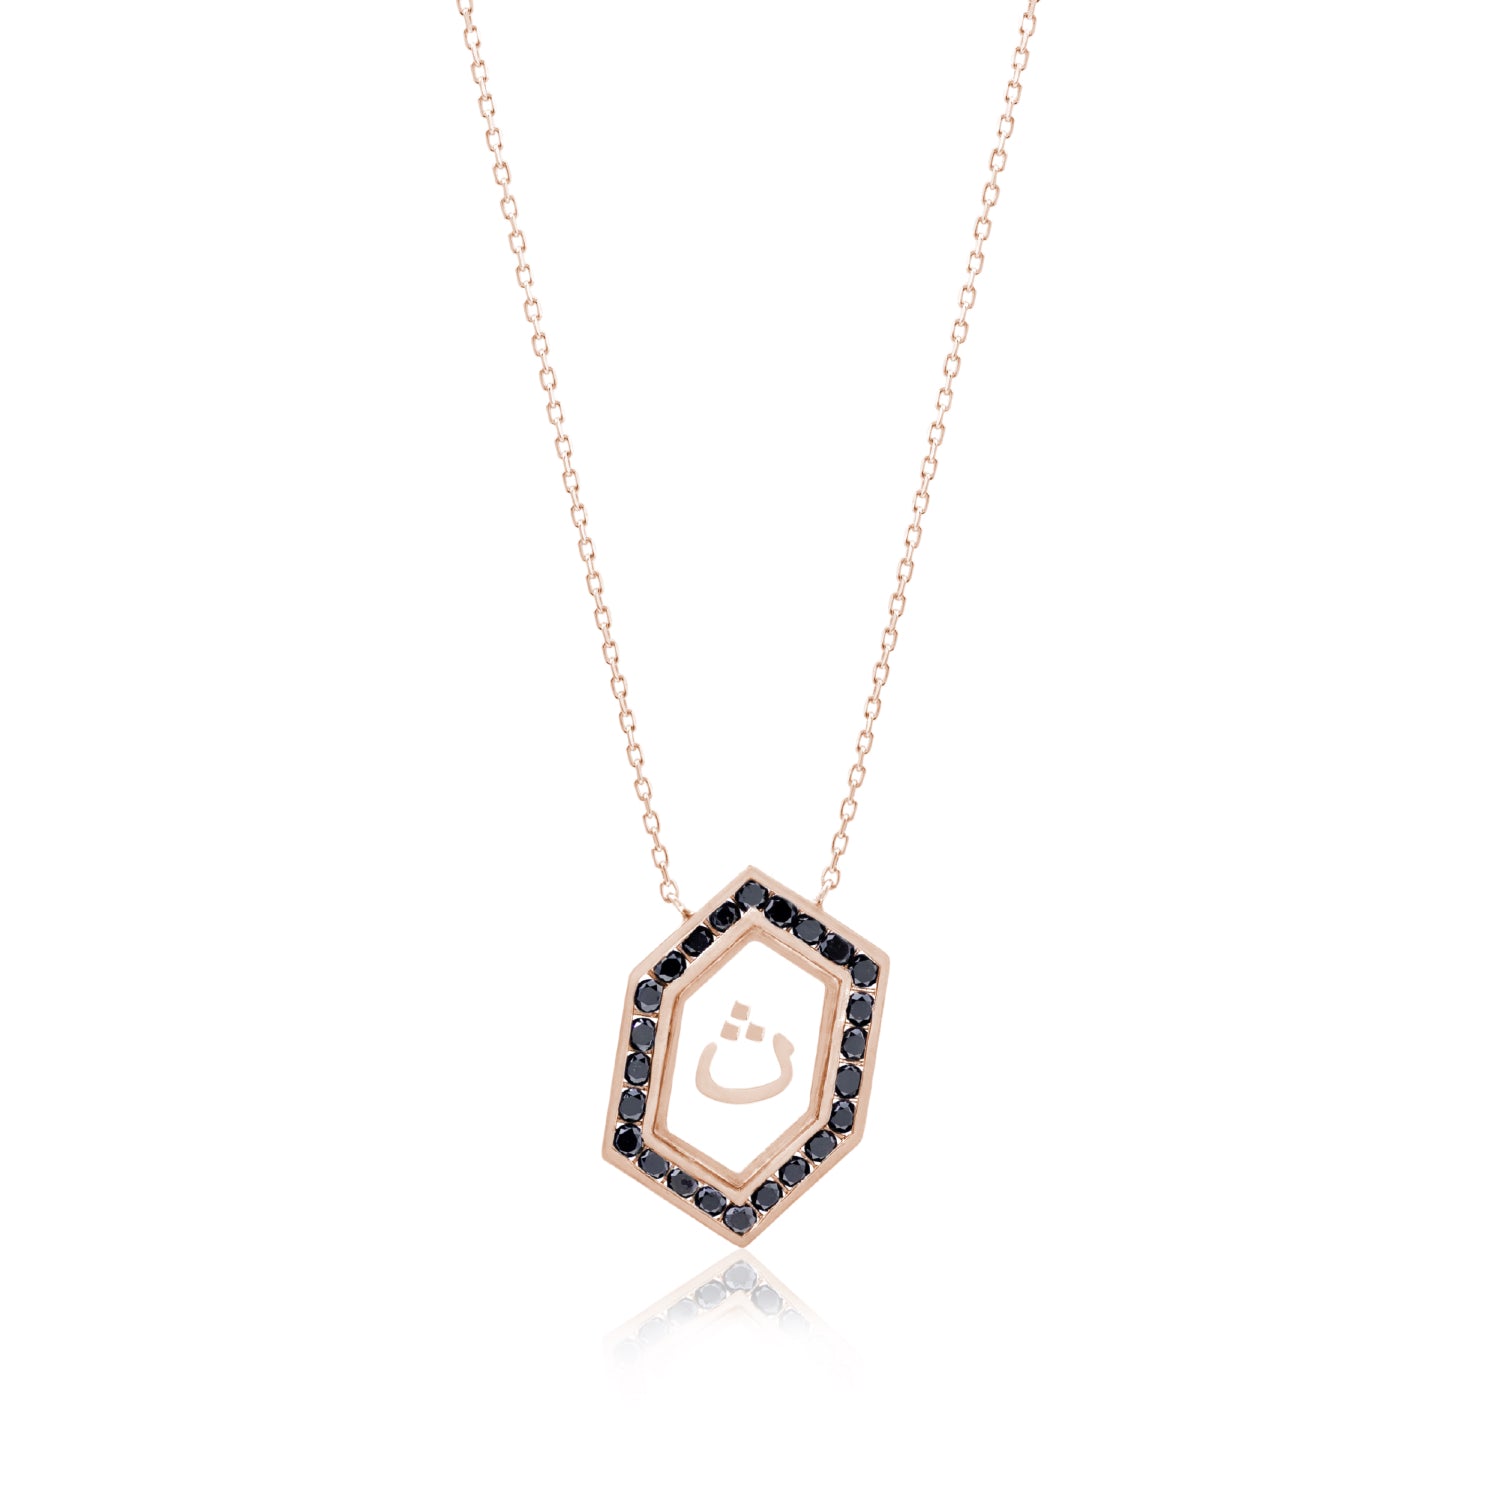 Qamoos 1.0 Letter ث Black Diamond Necklace in Rose Gold